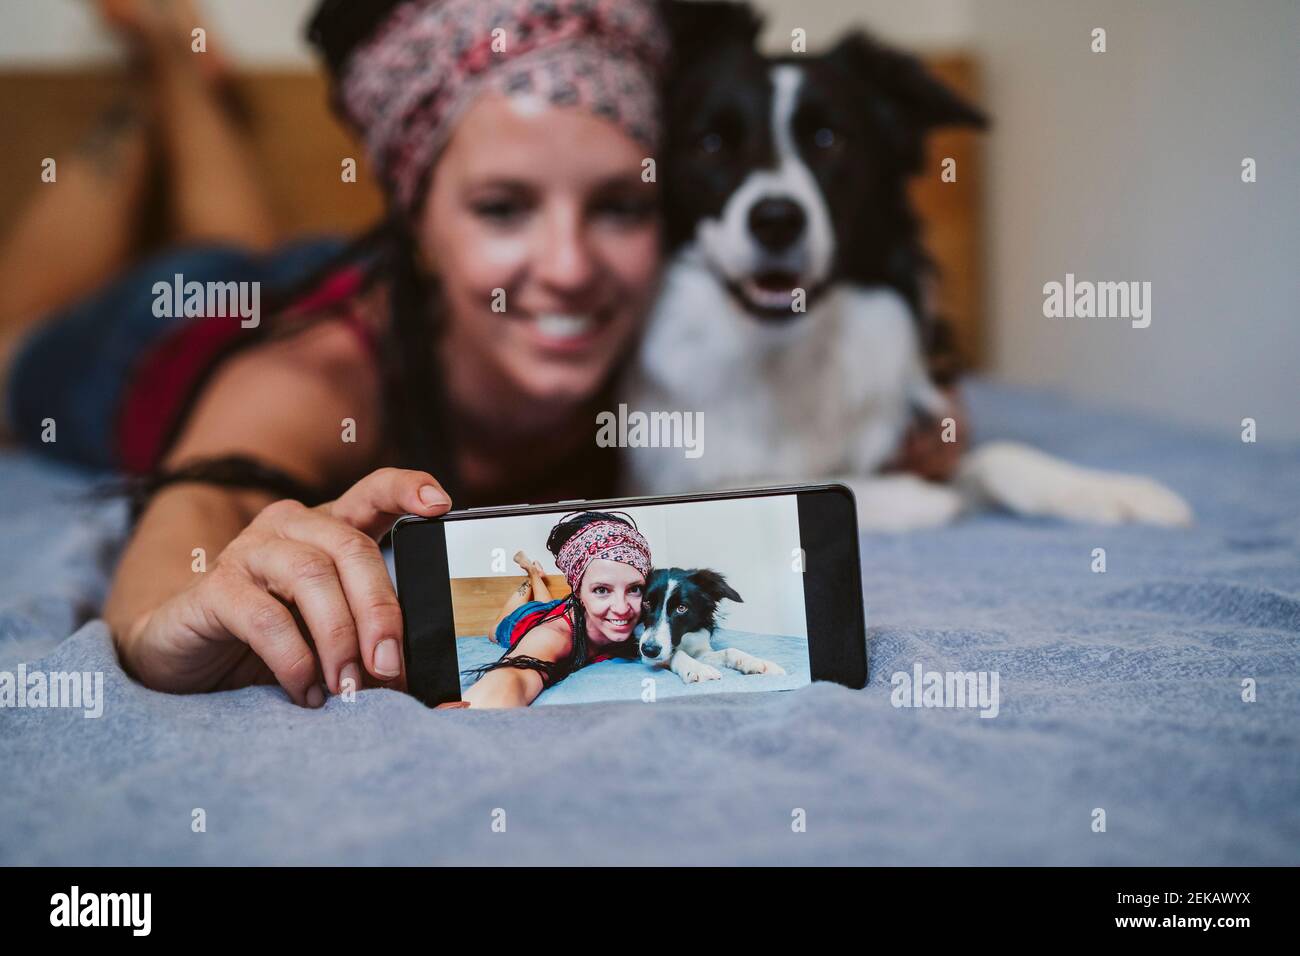 Woman taking selfie through mobile phone while lying on bed with dog at home Stock Photo